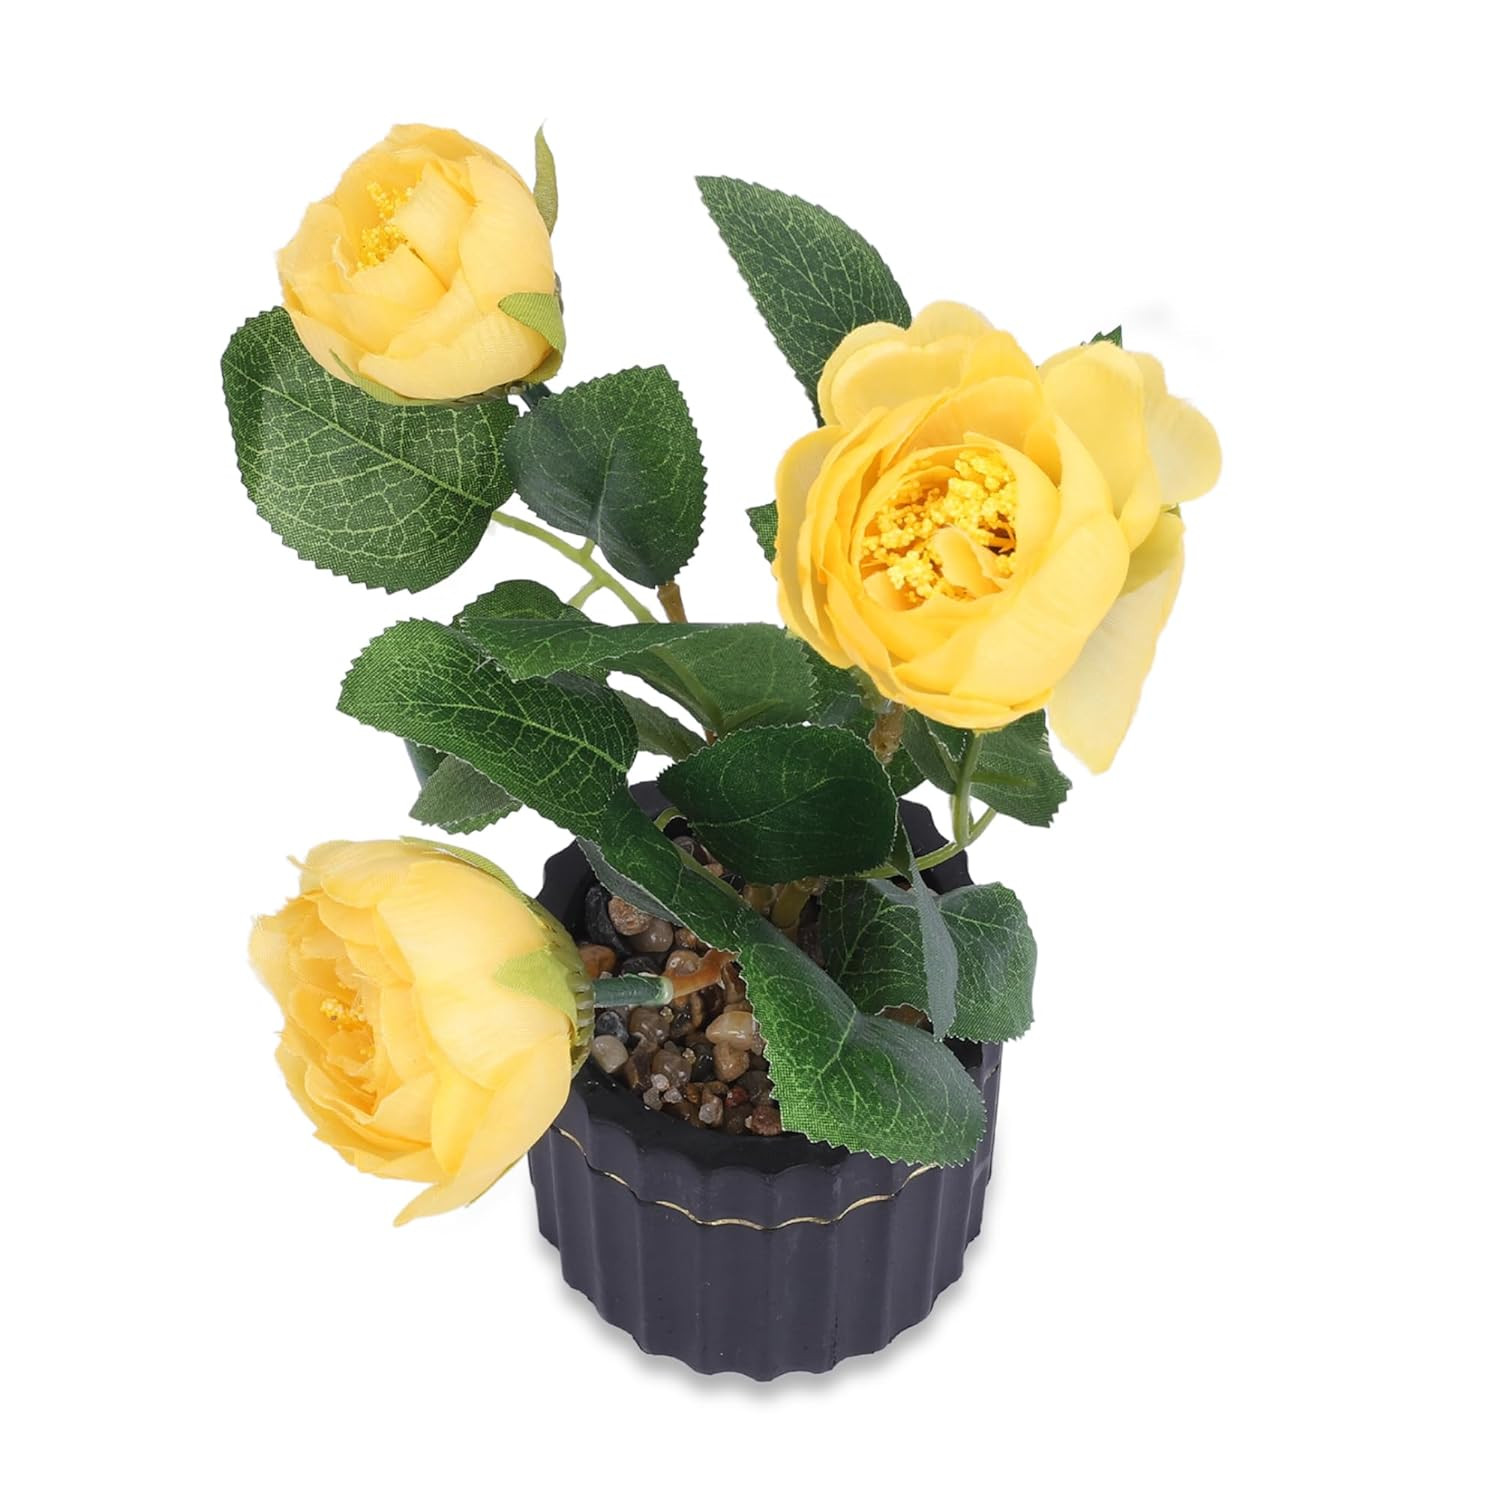 Kuber Industries Artificial Plants for Home DÃ©cor|Natural Looking Indoor Fake Plants with Pot|Artificial Flowers for Decoration (Yellow)